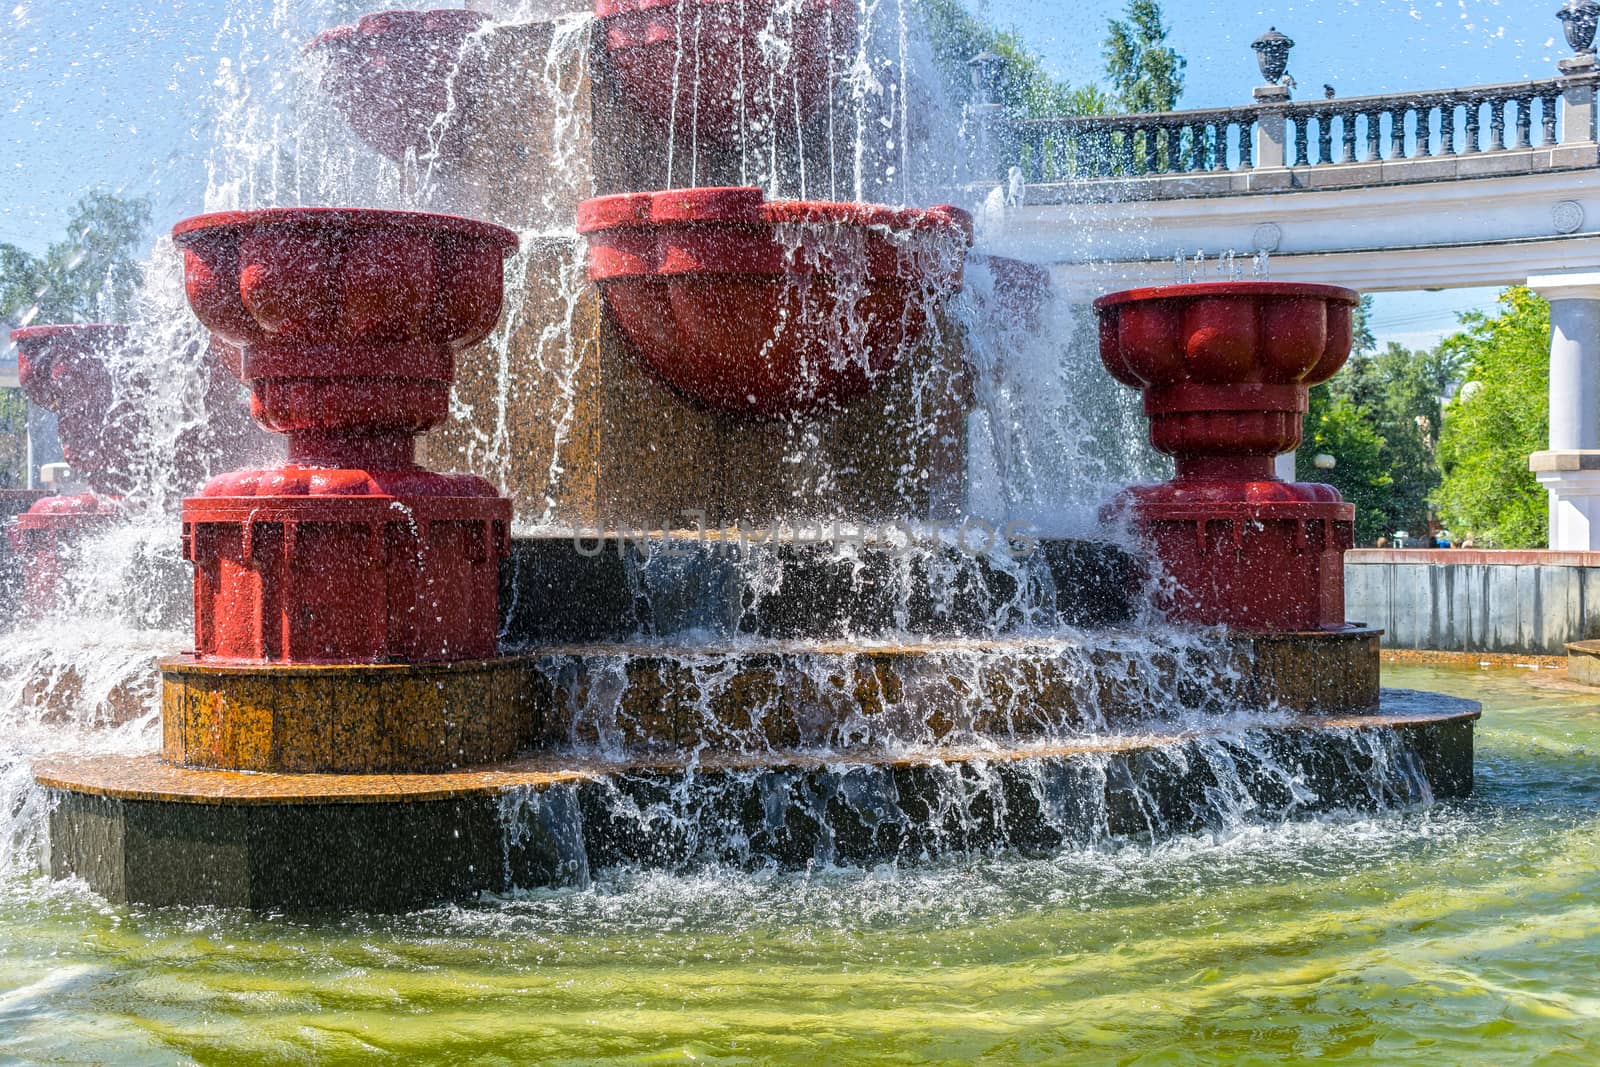 Water and splashes in the city fountain in summer